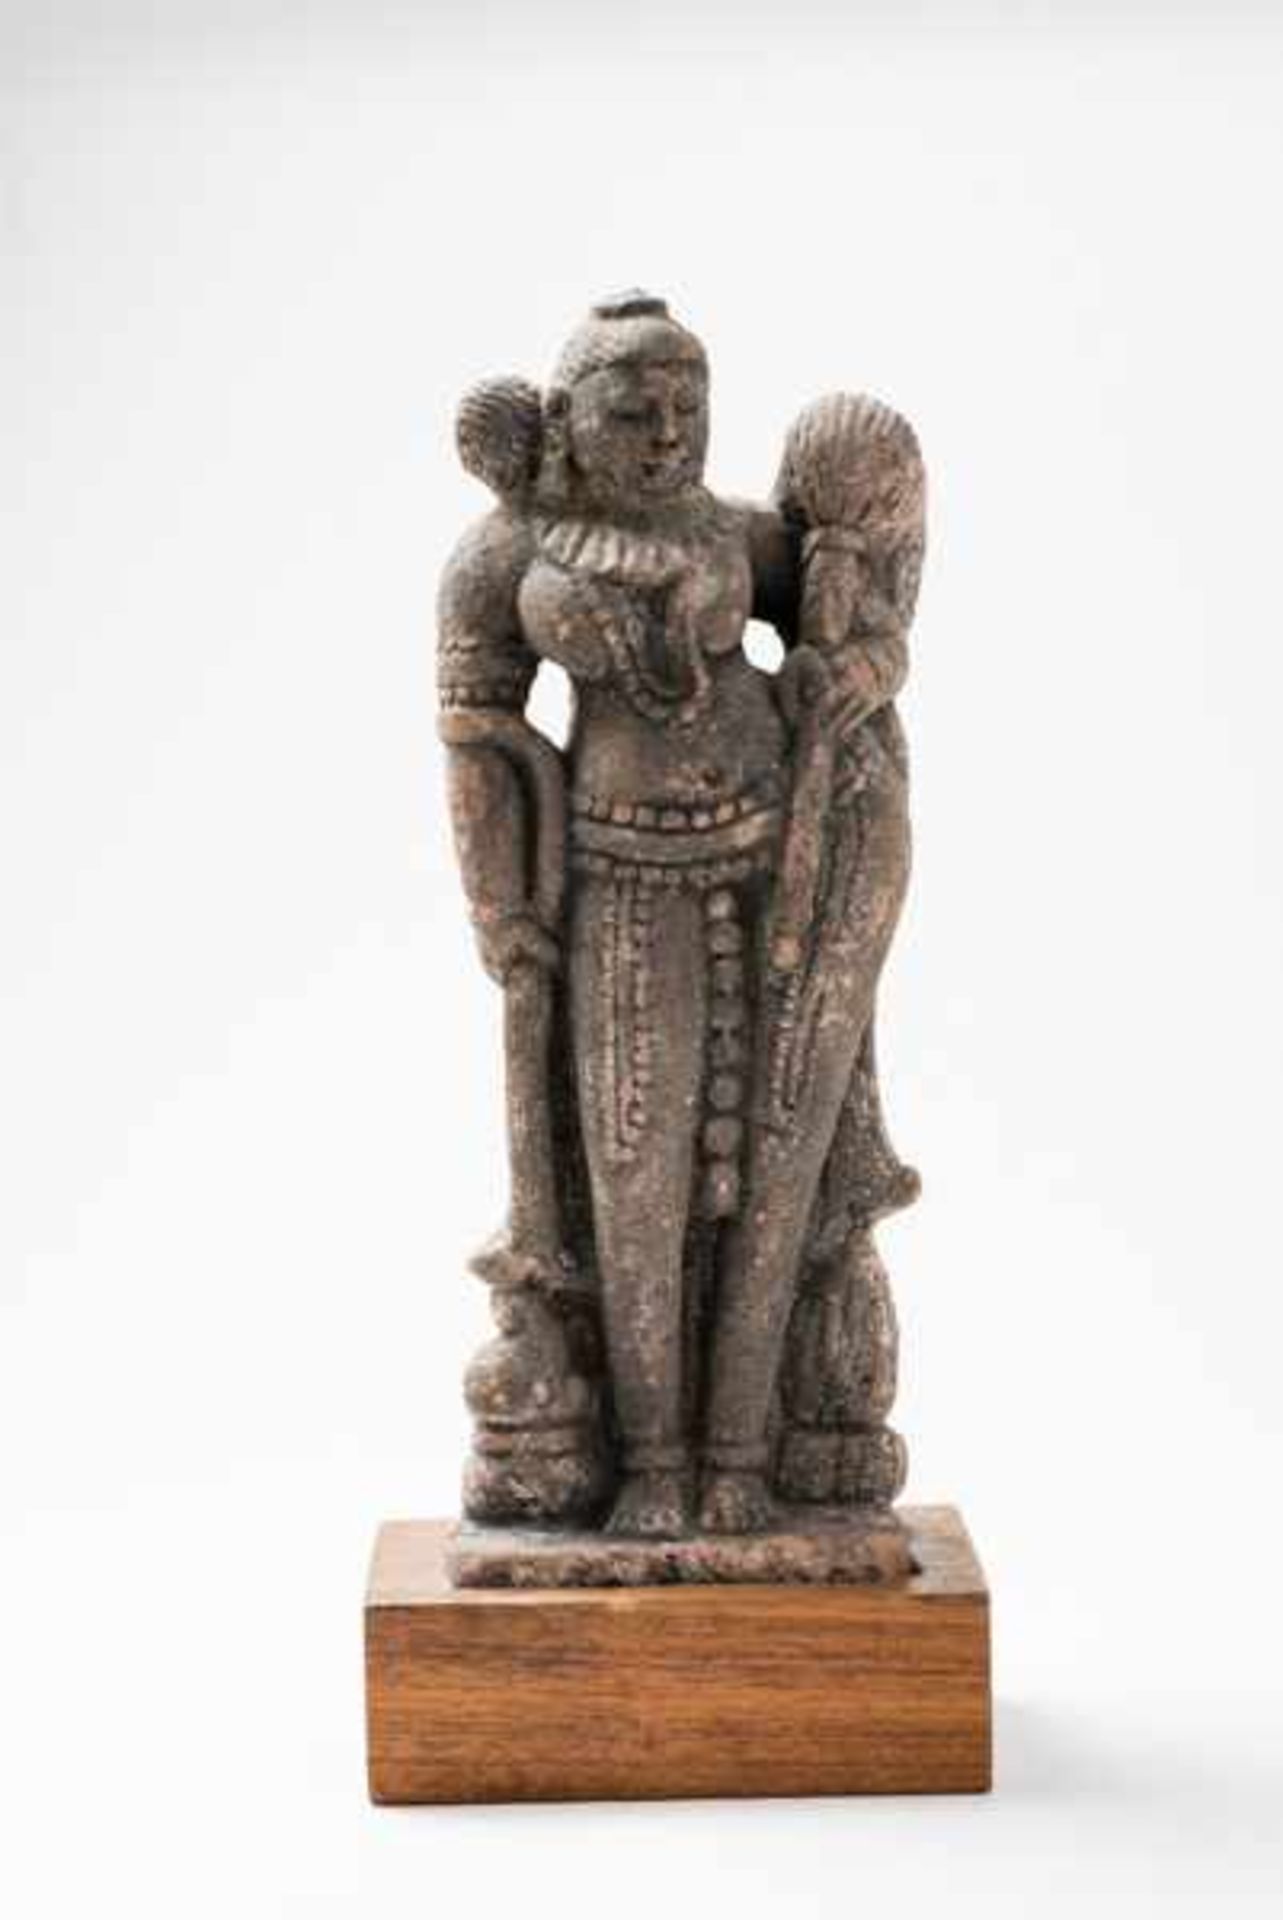 TEMPLE SCULPTURE OF A DIVINE, FEMALE MUSICIAN Sandstone. Madhya Pradesh, Northern India, probably